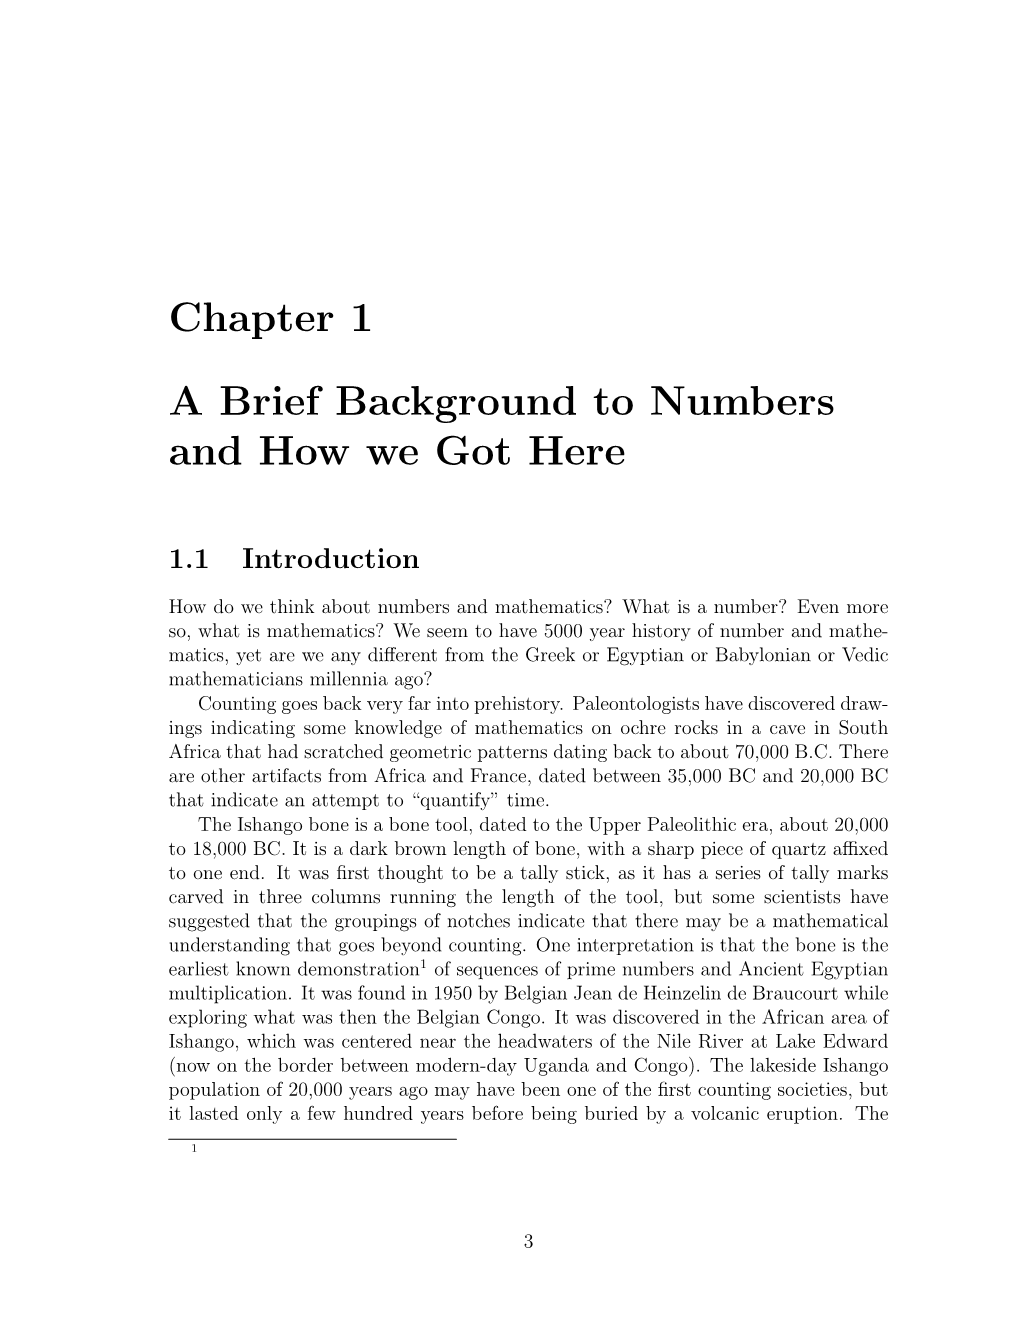 Chapter 1 a Brief Background to Numbers and How We Got Here